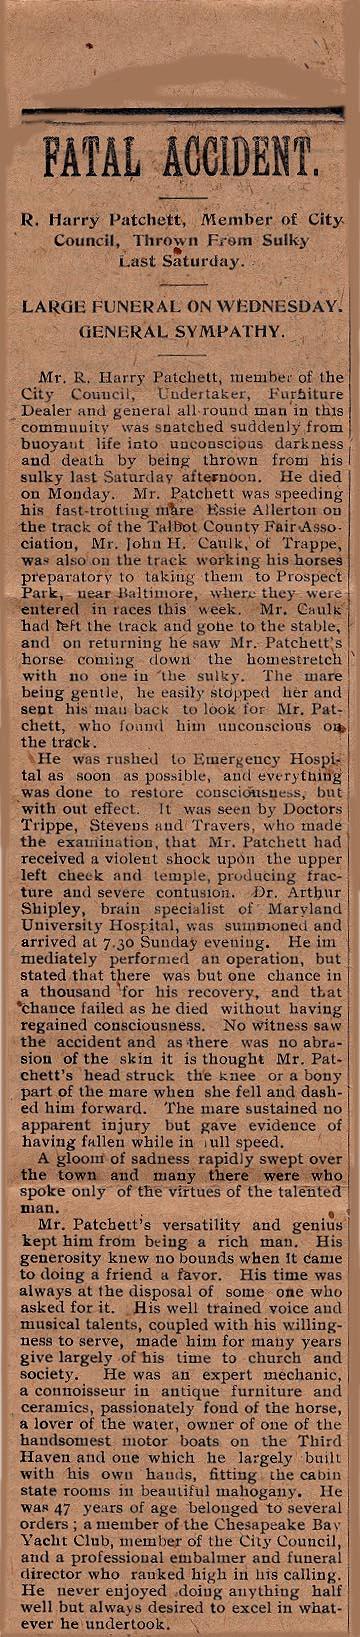 Newsclipping of accident of R. Harry Patchett